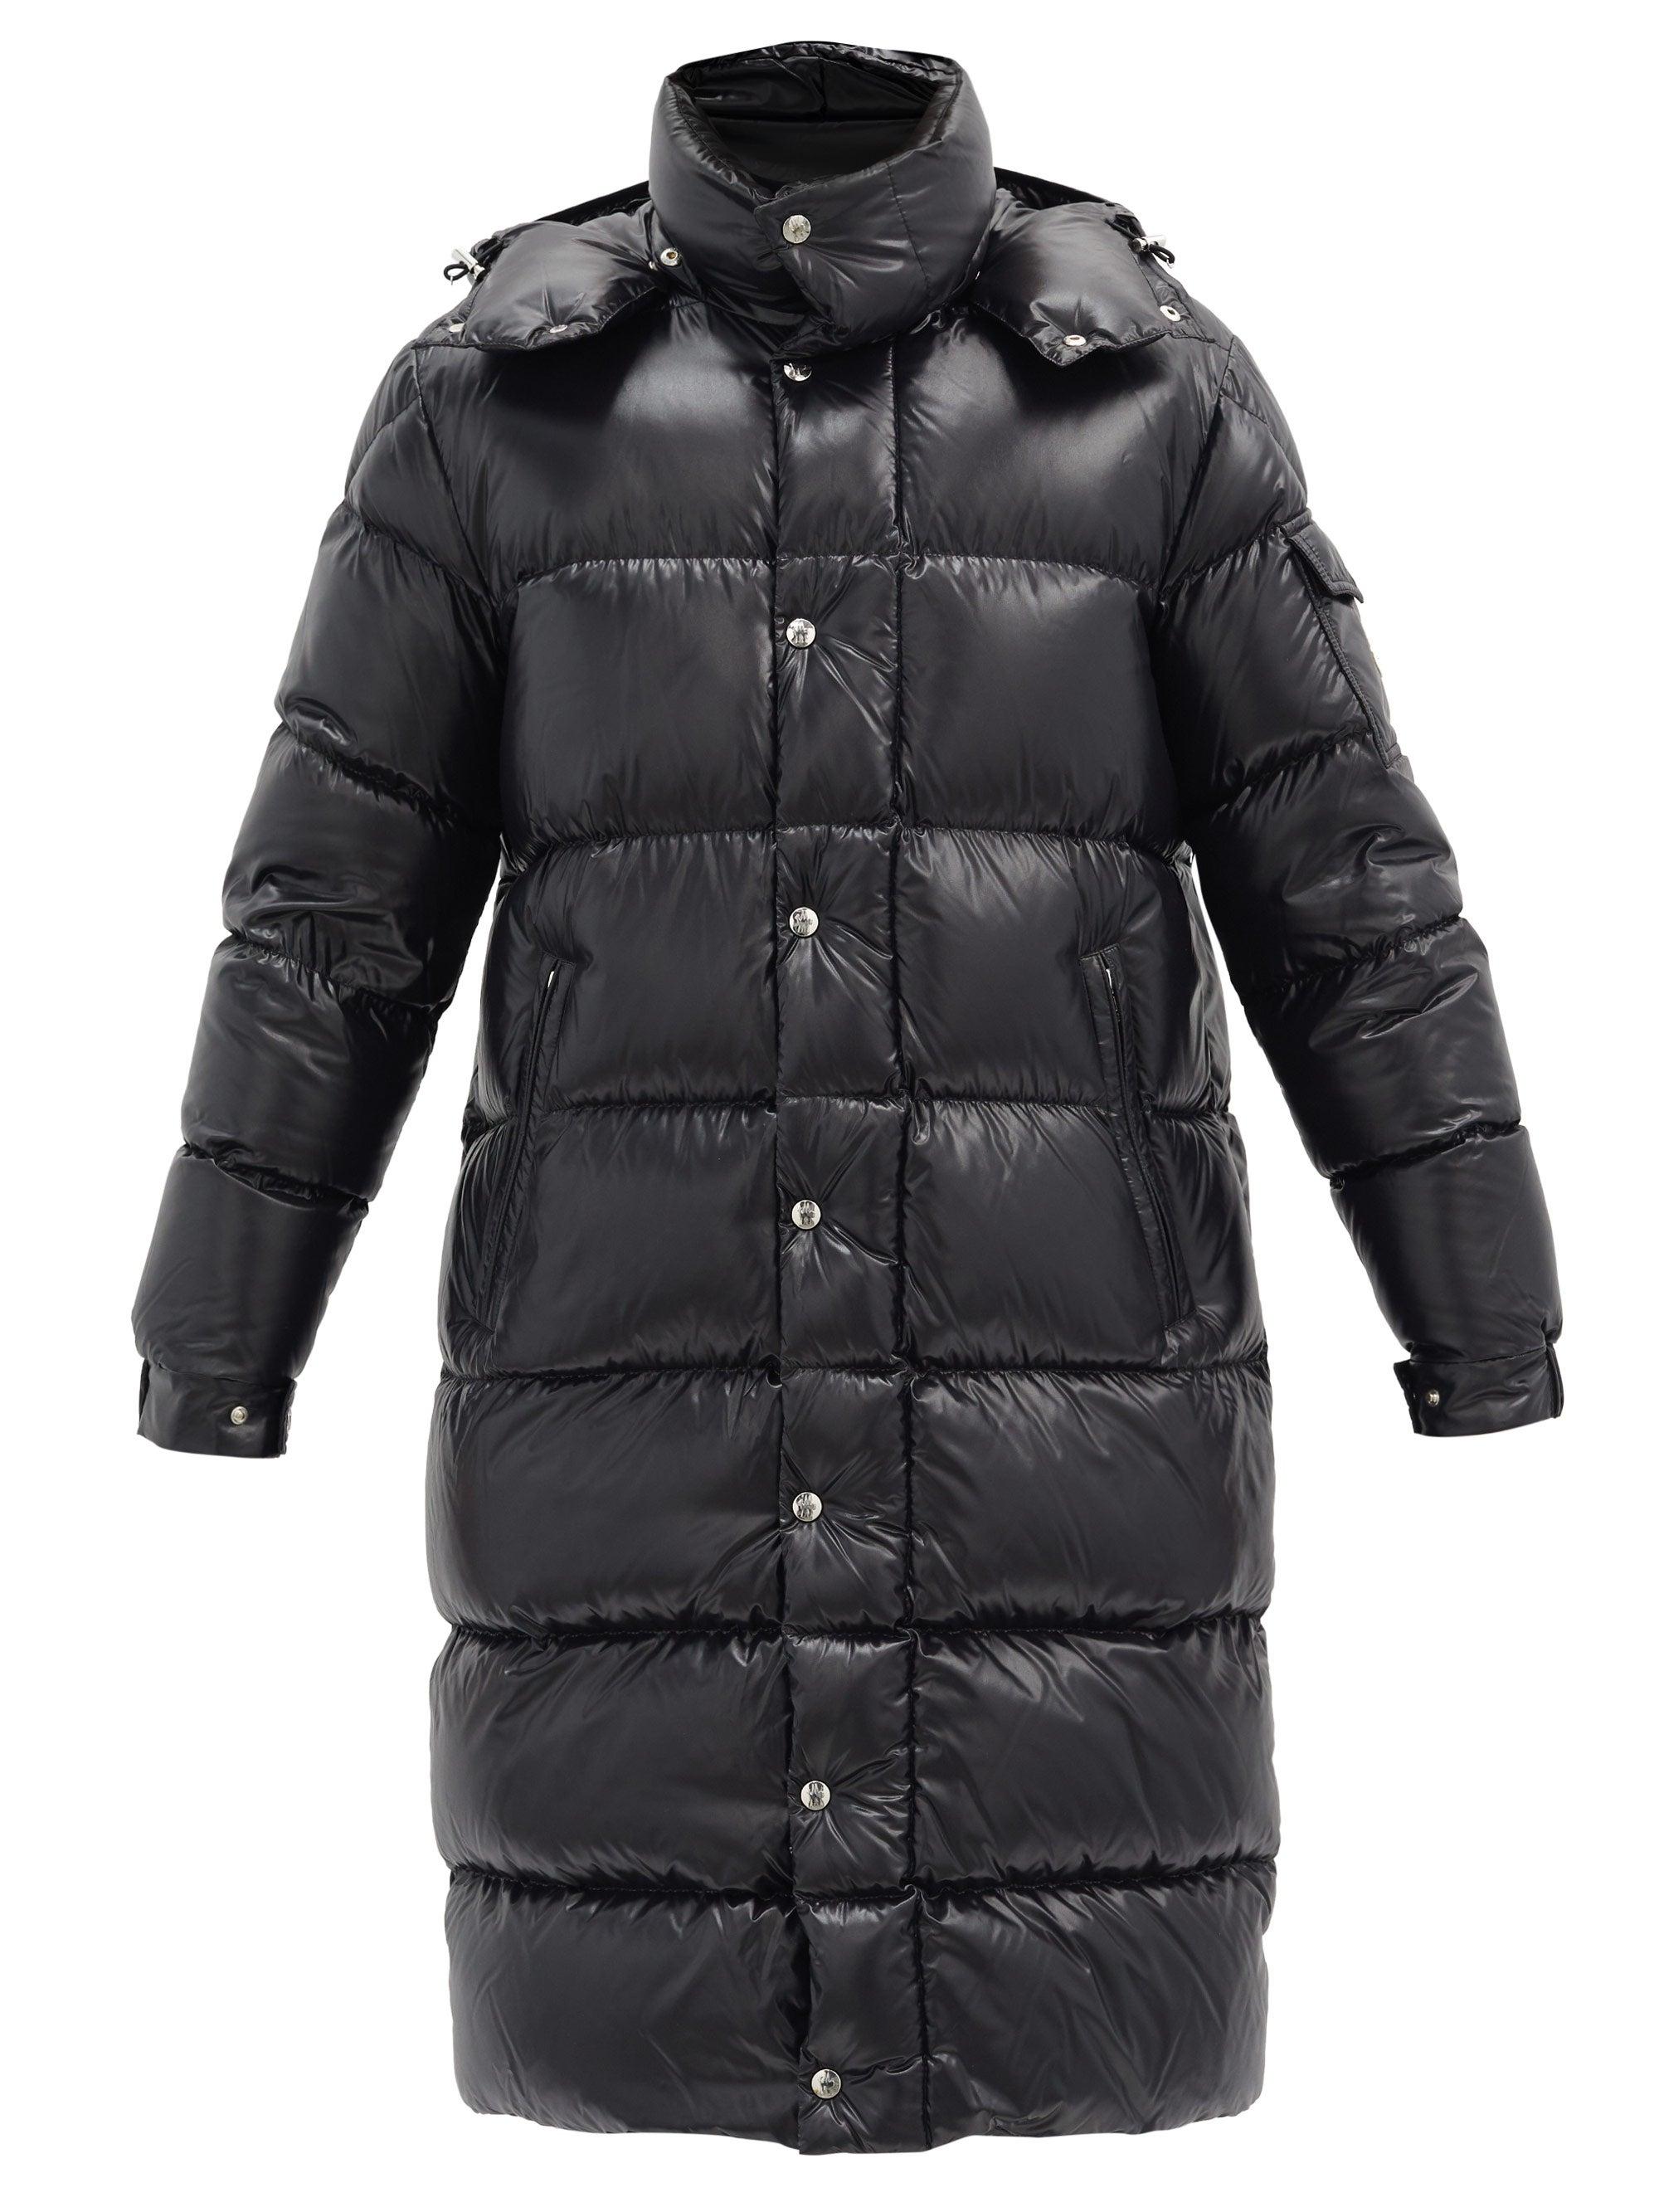 Moncler Goose Hanoverian Down-quilted Hooded Coat in Black for Men - Lyst